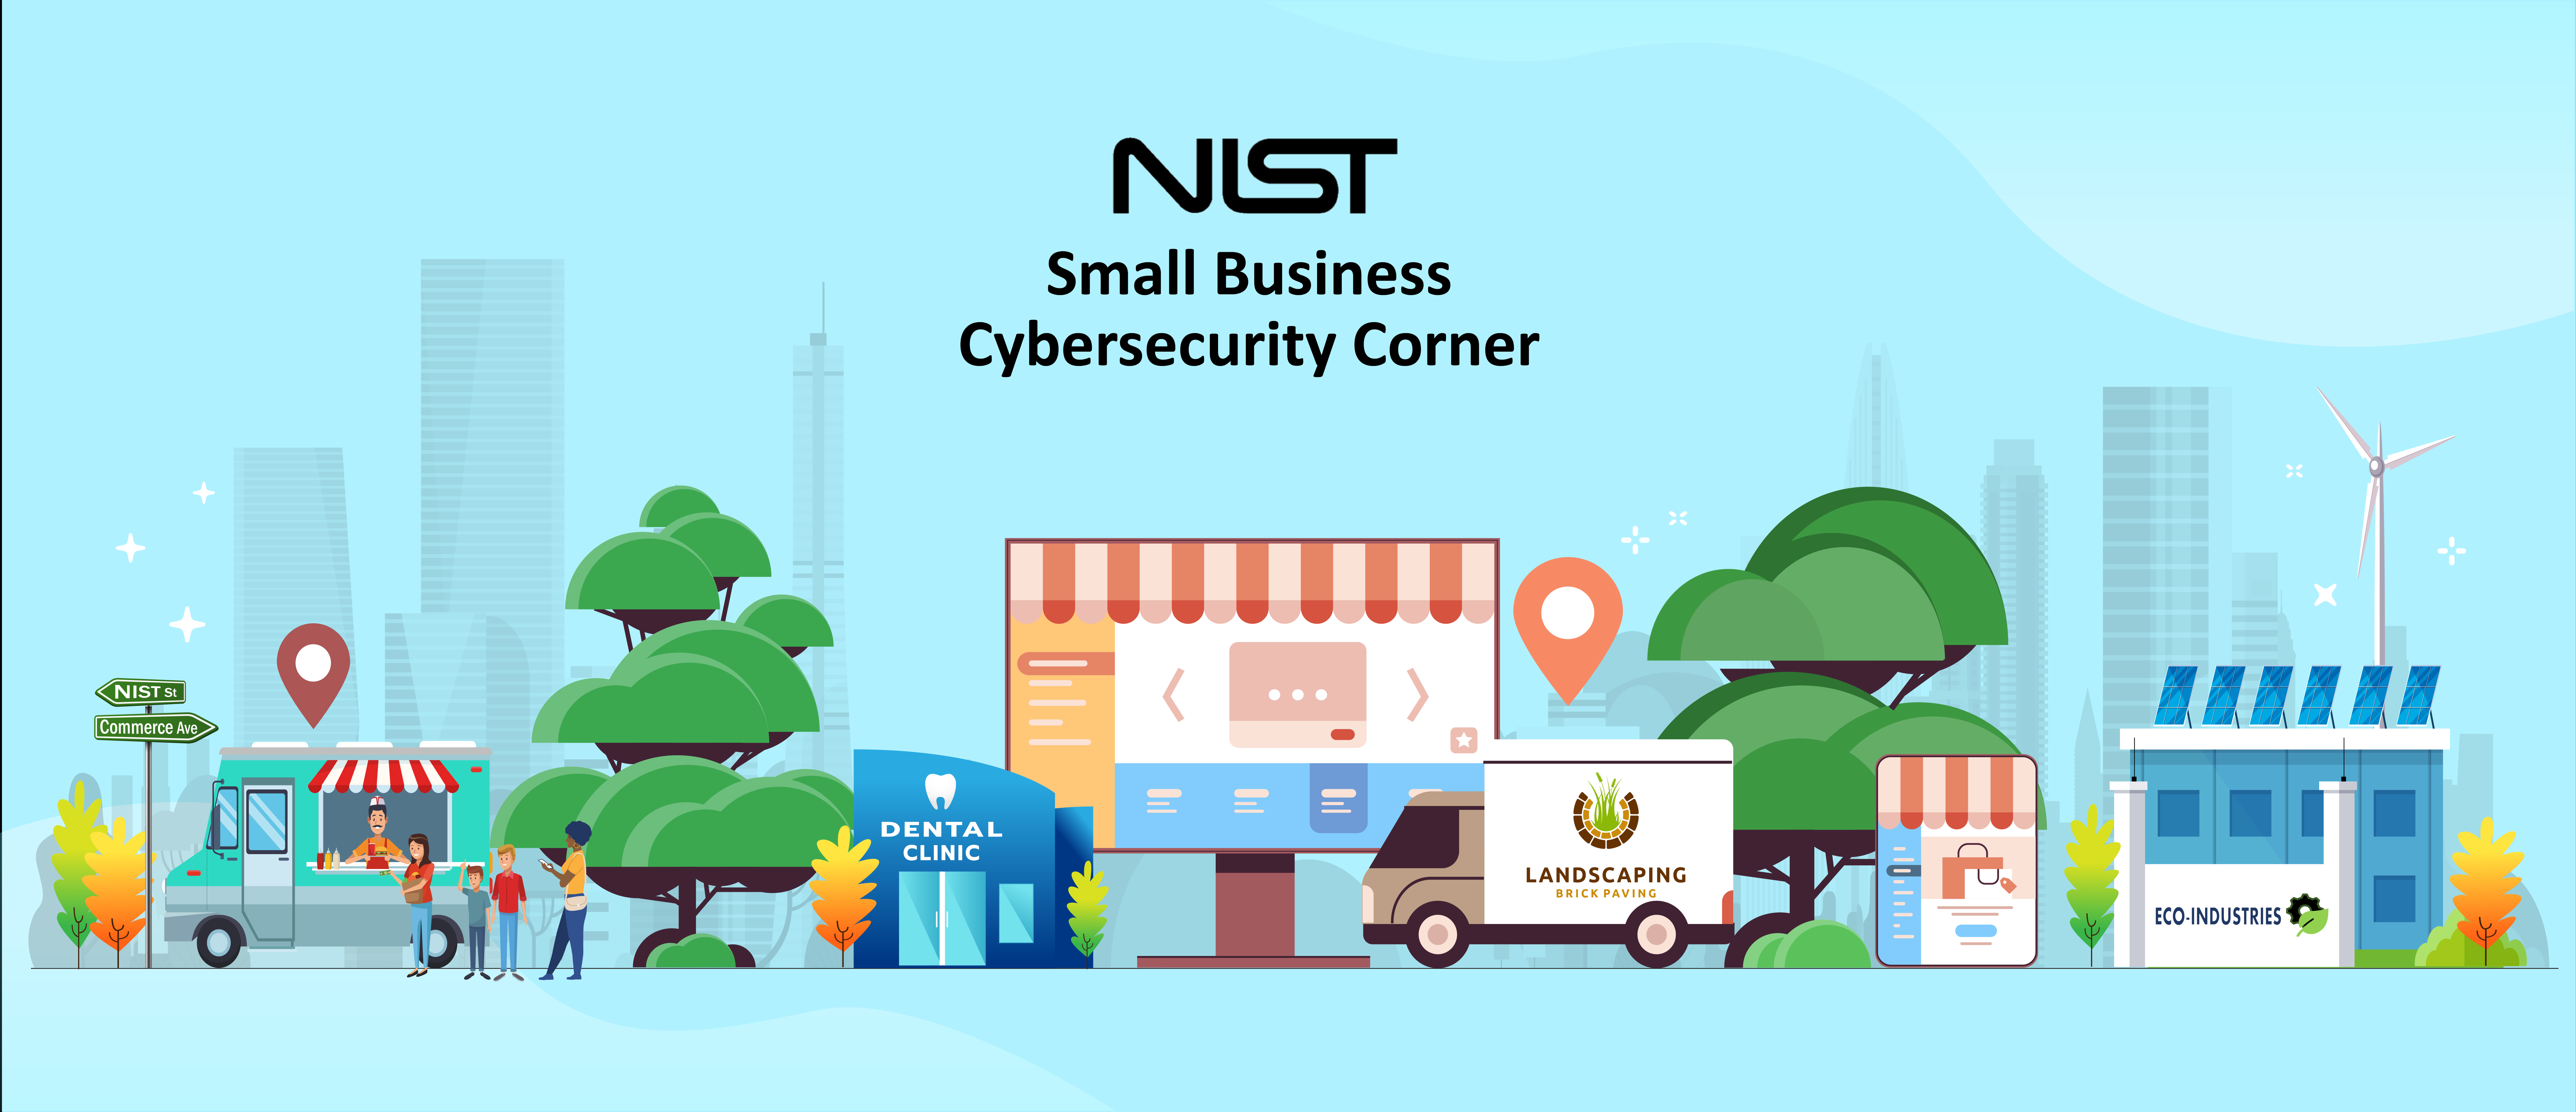 Easy Ways To Boost Your Small Business Cybersecurity And Keep Your Data Safe